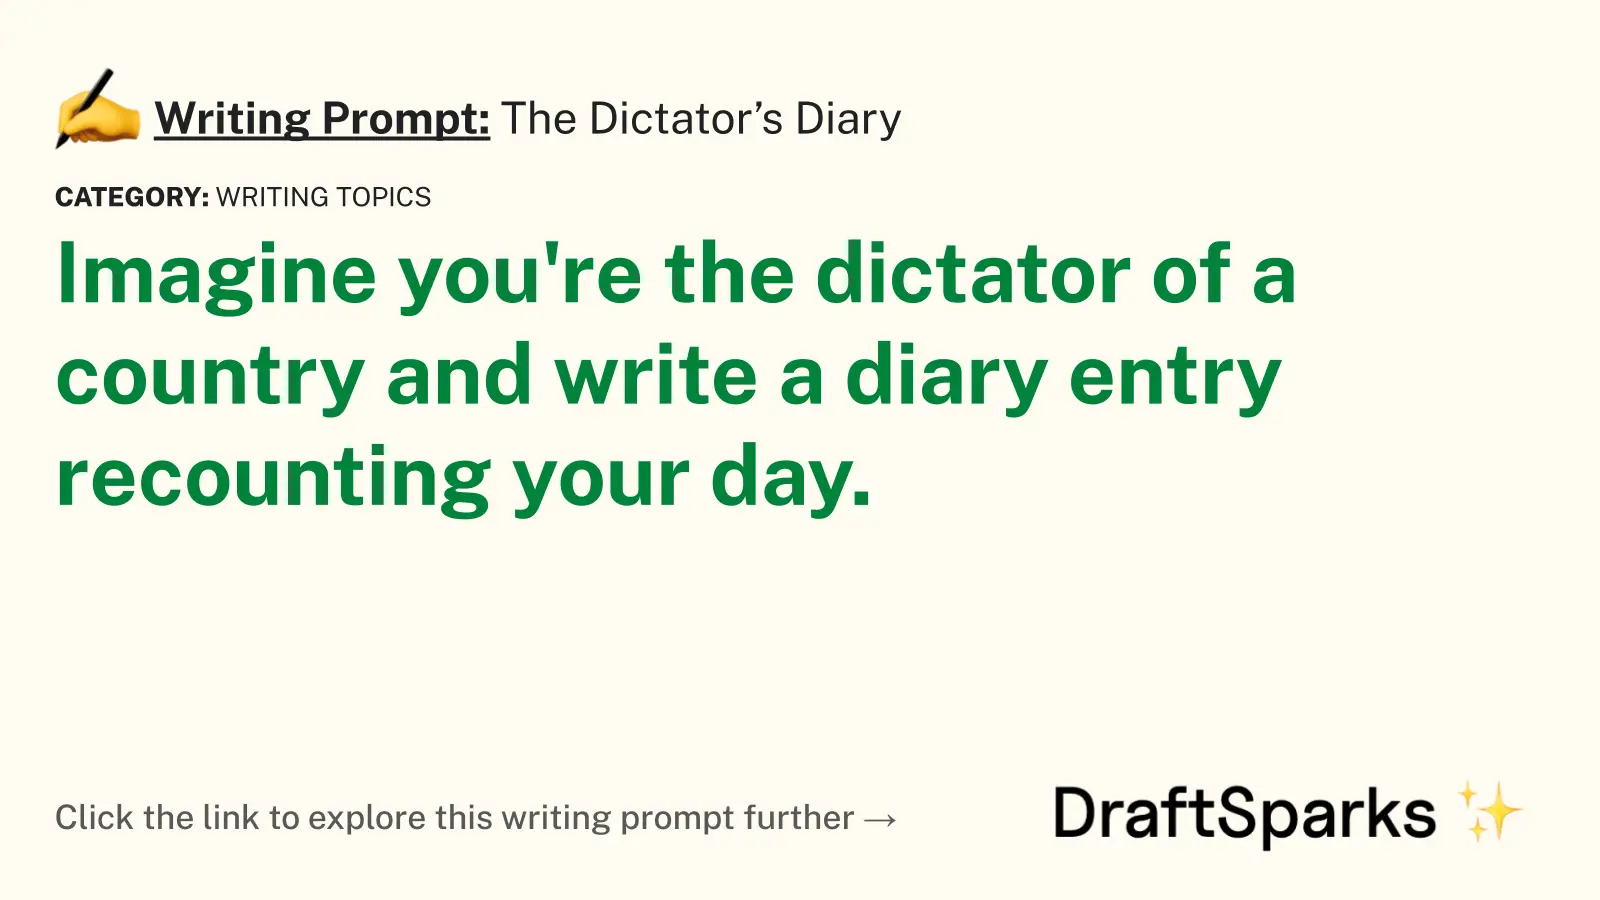 The Dictator’s Diary